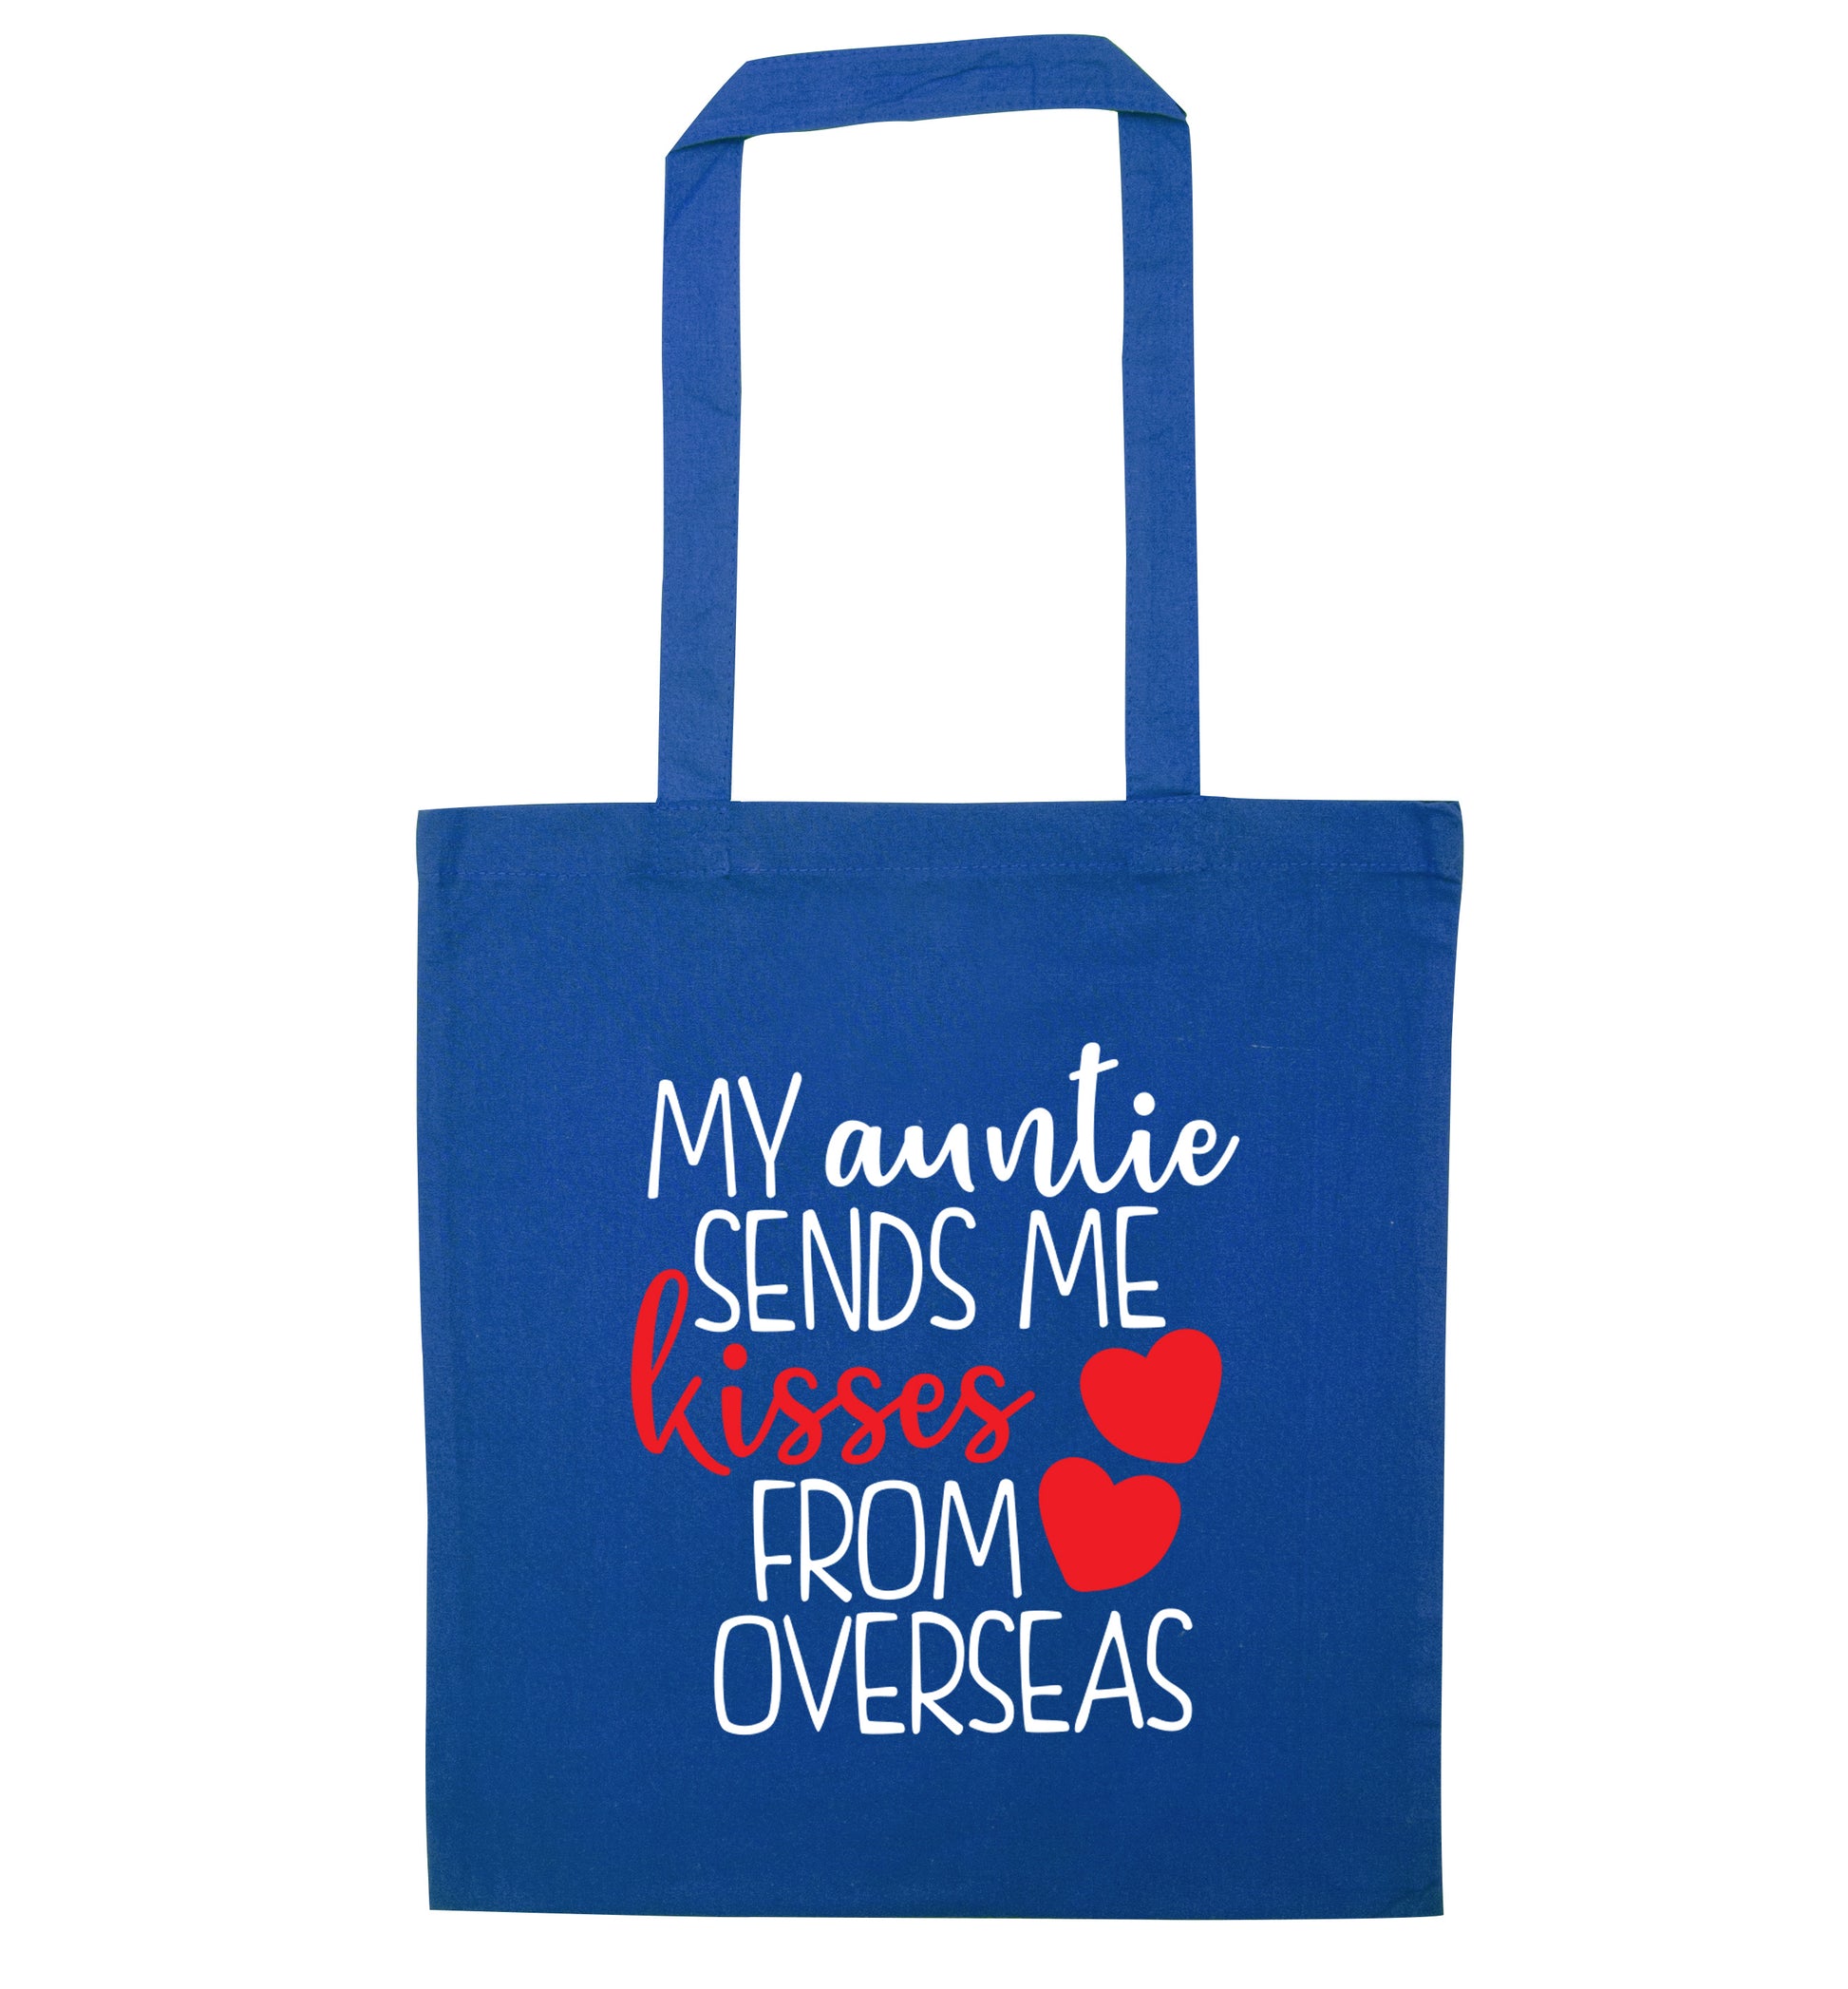 My auntie sends me kisses from overseas blue tote bag